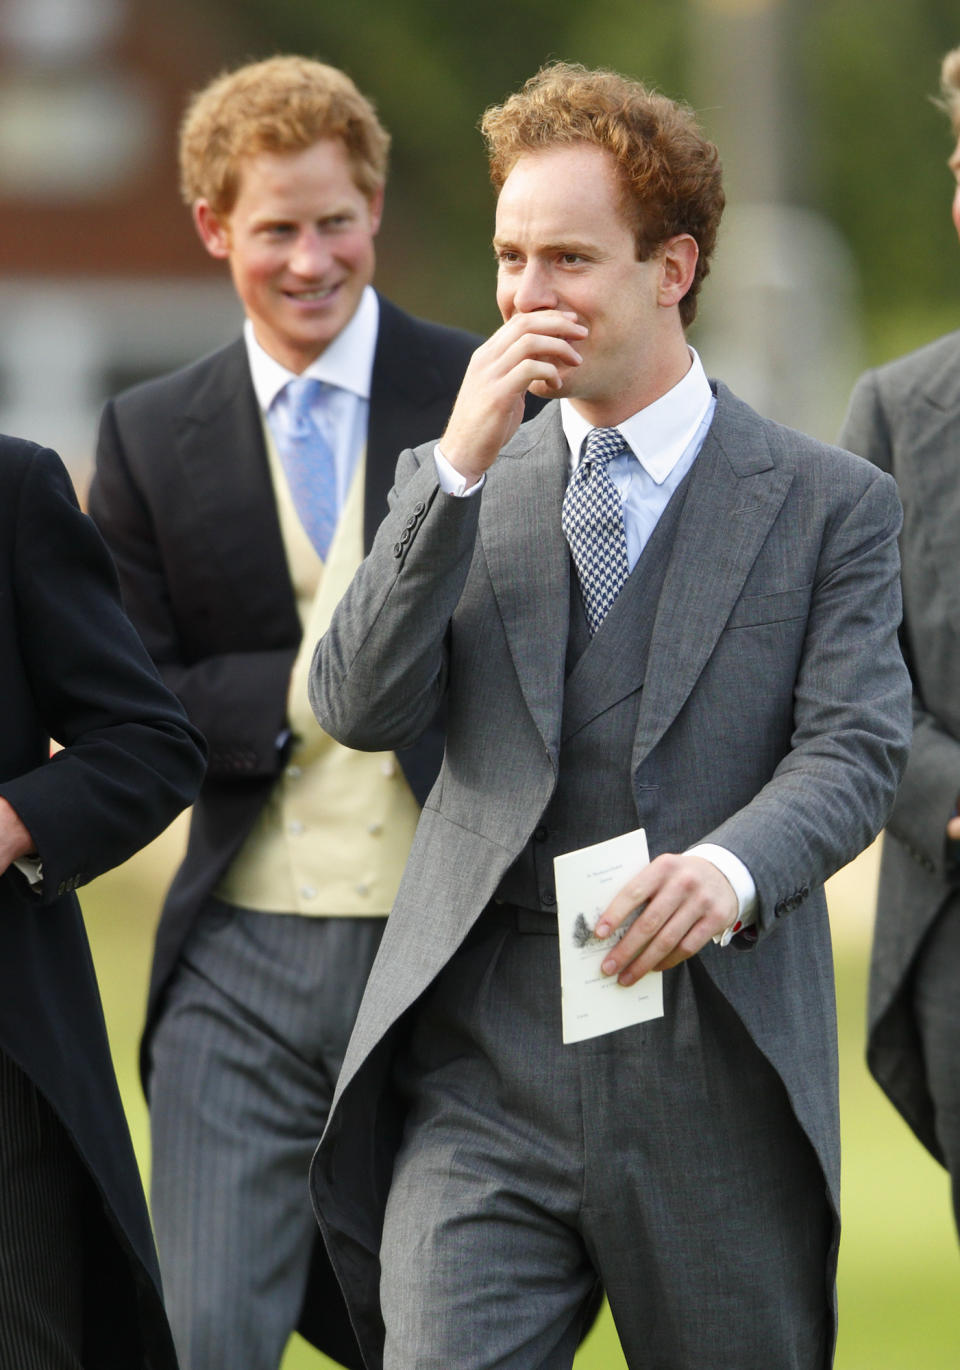 The former Eton schoolmates were reportedly inseparable before the wedding Photo: Getty Images